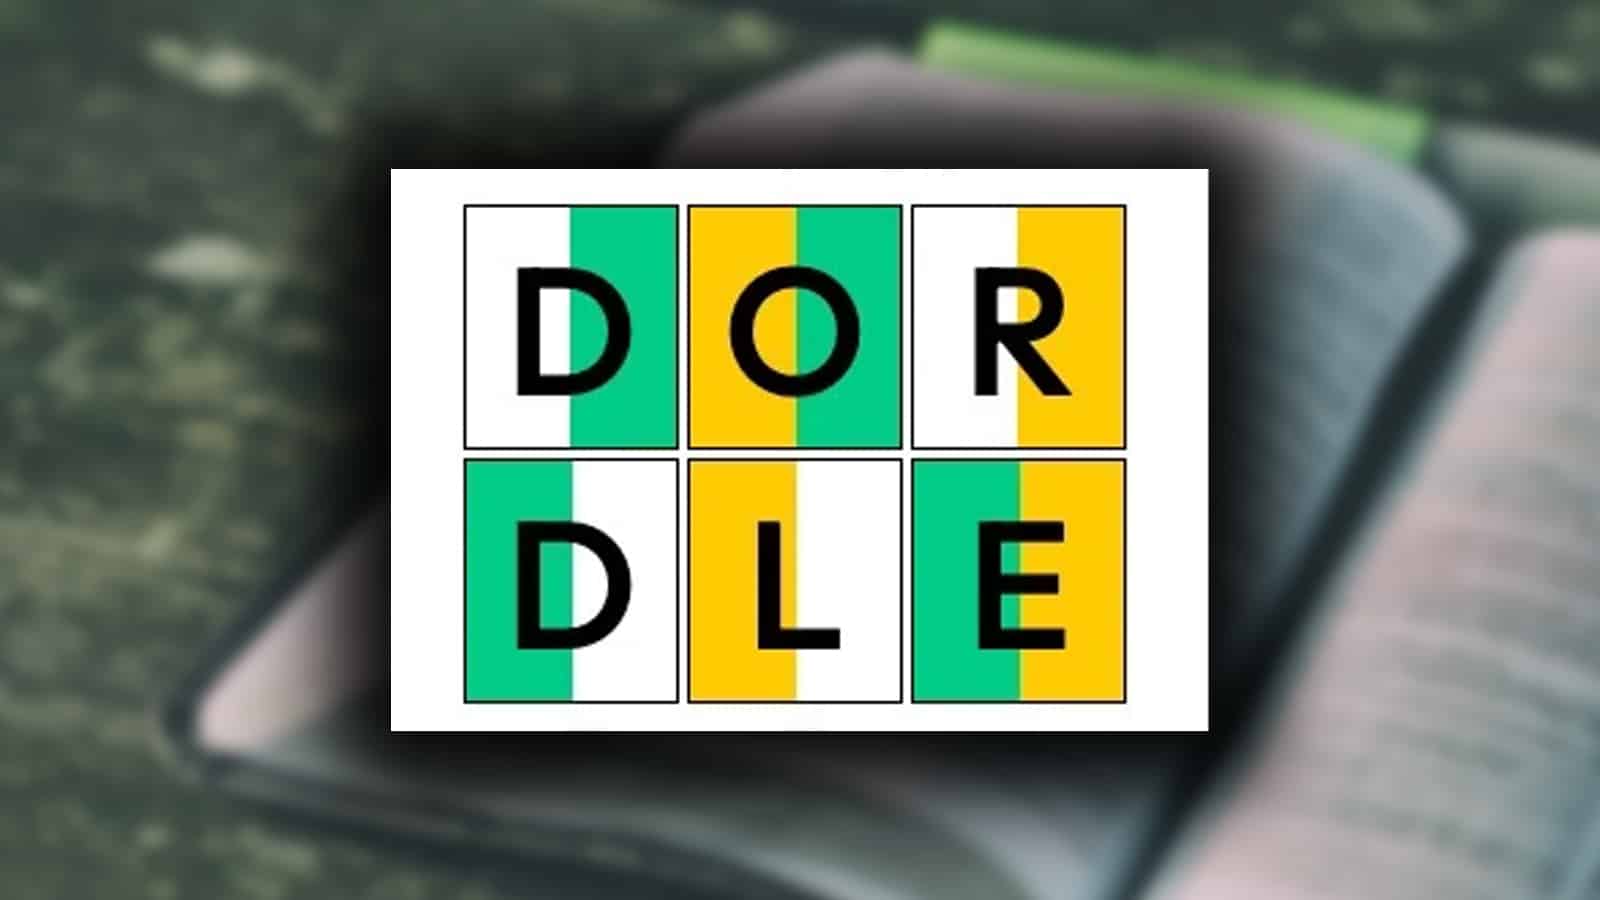 Daily Dordle answers: What are today’s Dordle game words? (November 24)